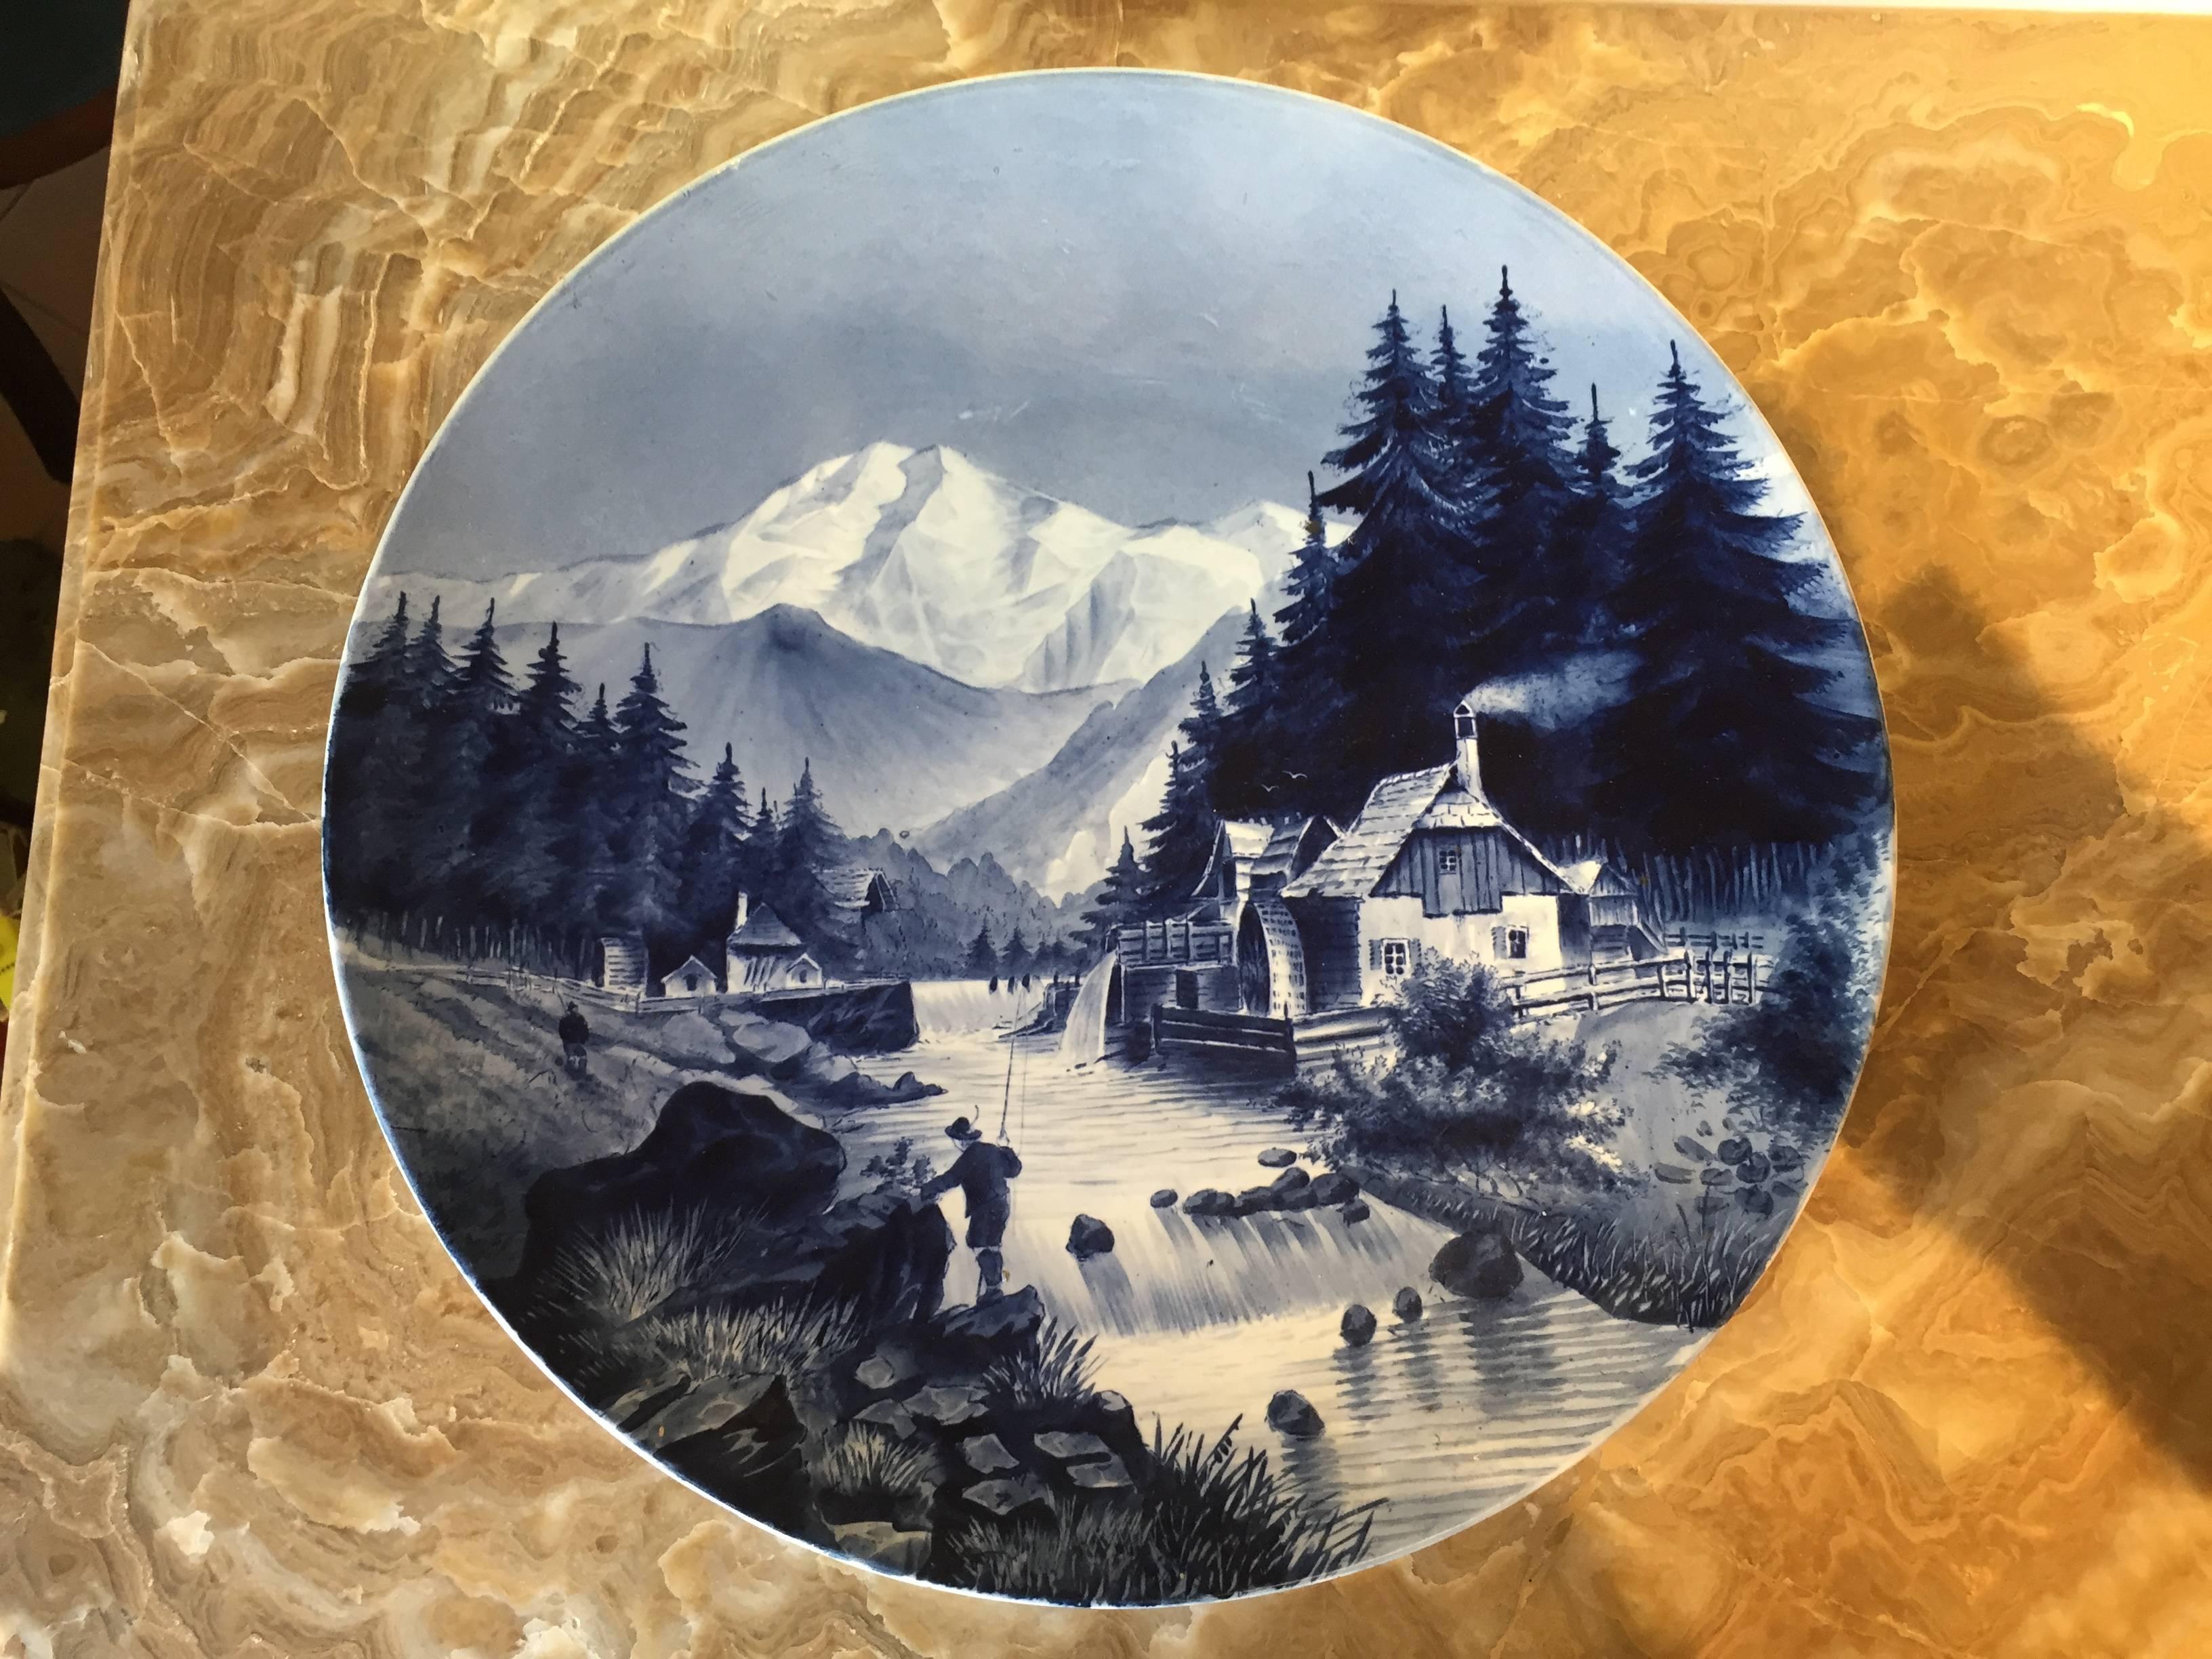 Incredibly beautiful pair of hand-painted plates.